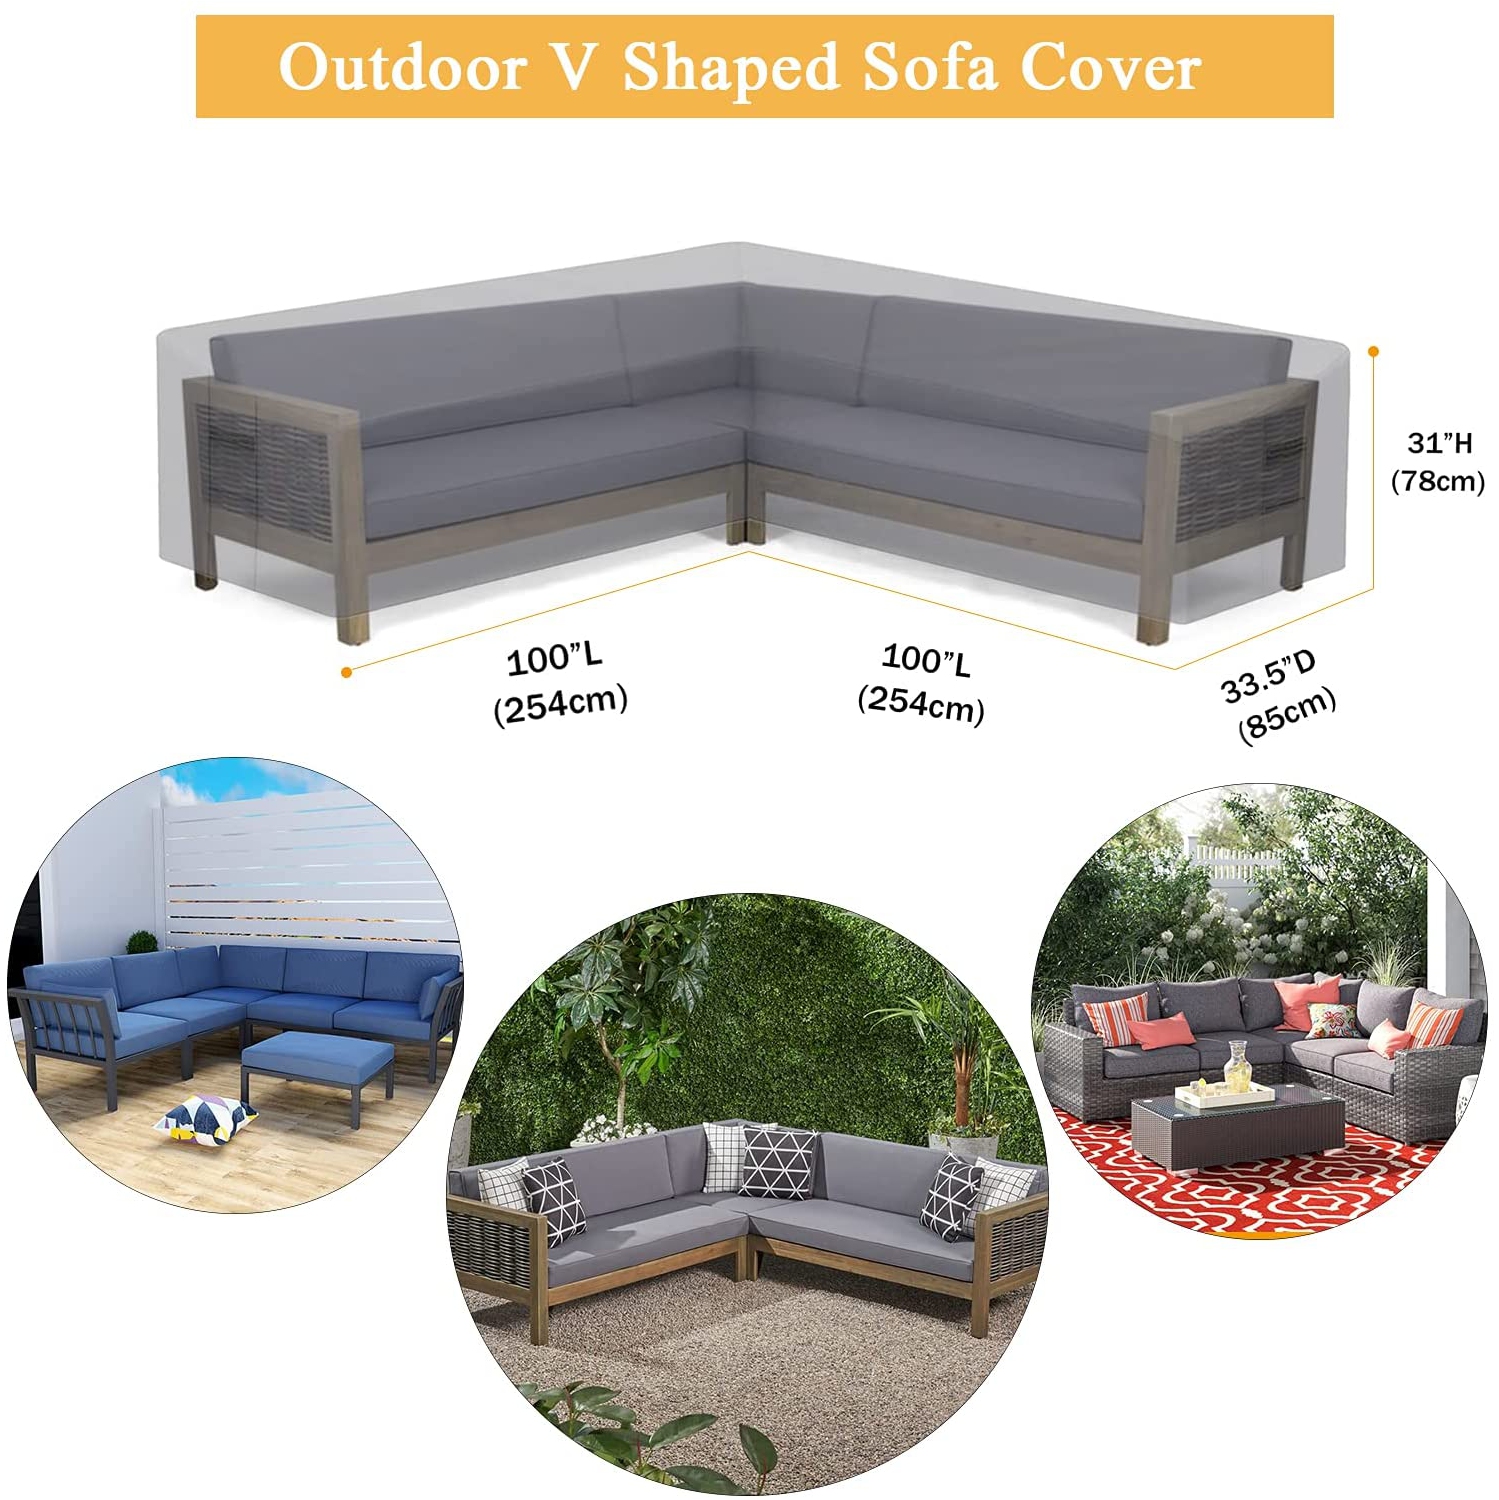 Wind Resistant Air Resistant Sofa Cover for Corner Sofa Waterproof L Shape Covers for Garden Furniture Protective Corner Sofa Cover 300x300x90cm-Grey 